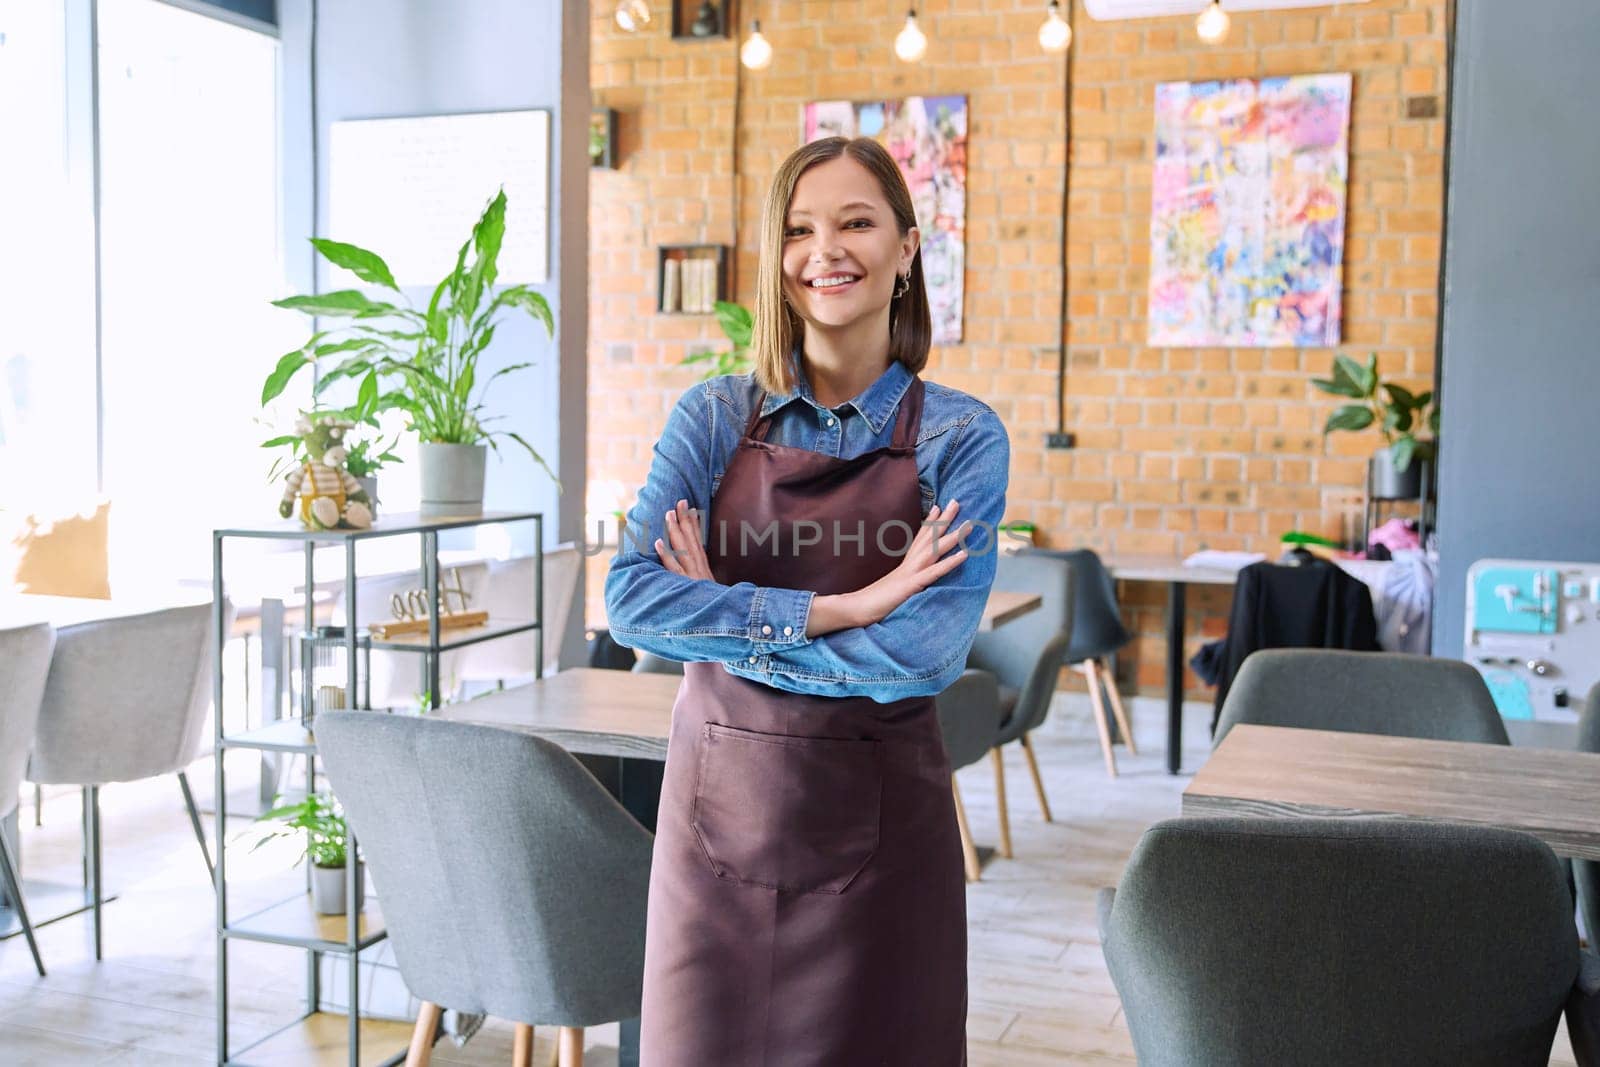 Confident successful young woman service worker owner in apron with crossed arms looking at camera in restaurant cafeteria coffee pastry shop interior. Small business staff occupation entrepreneur work